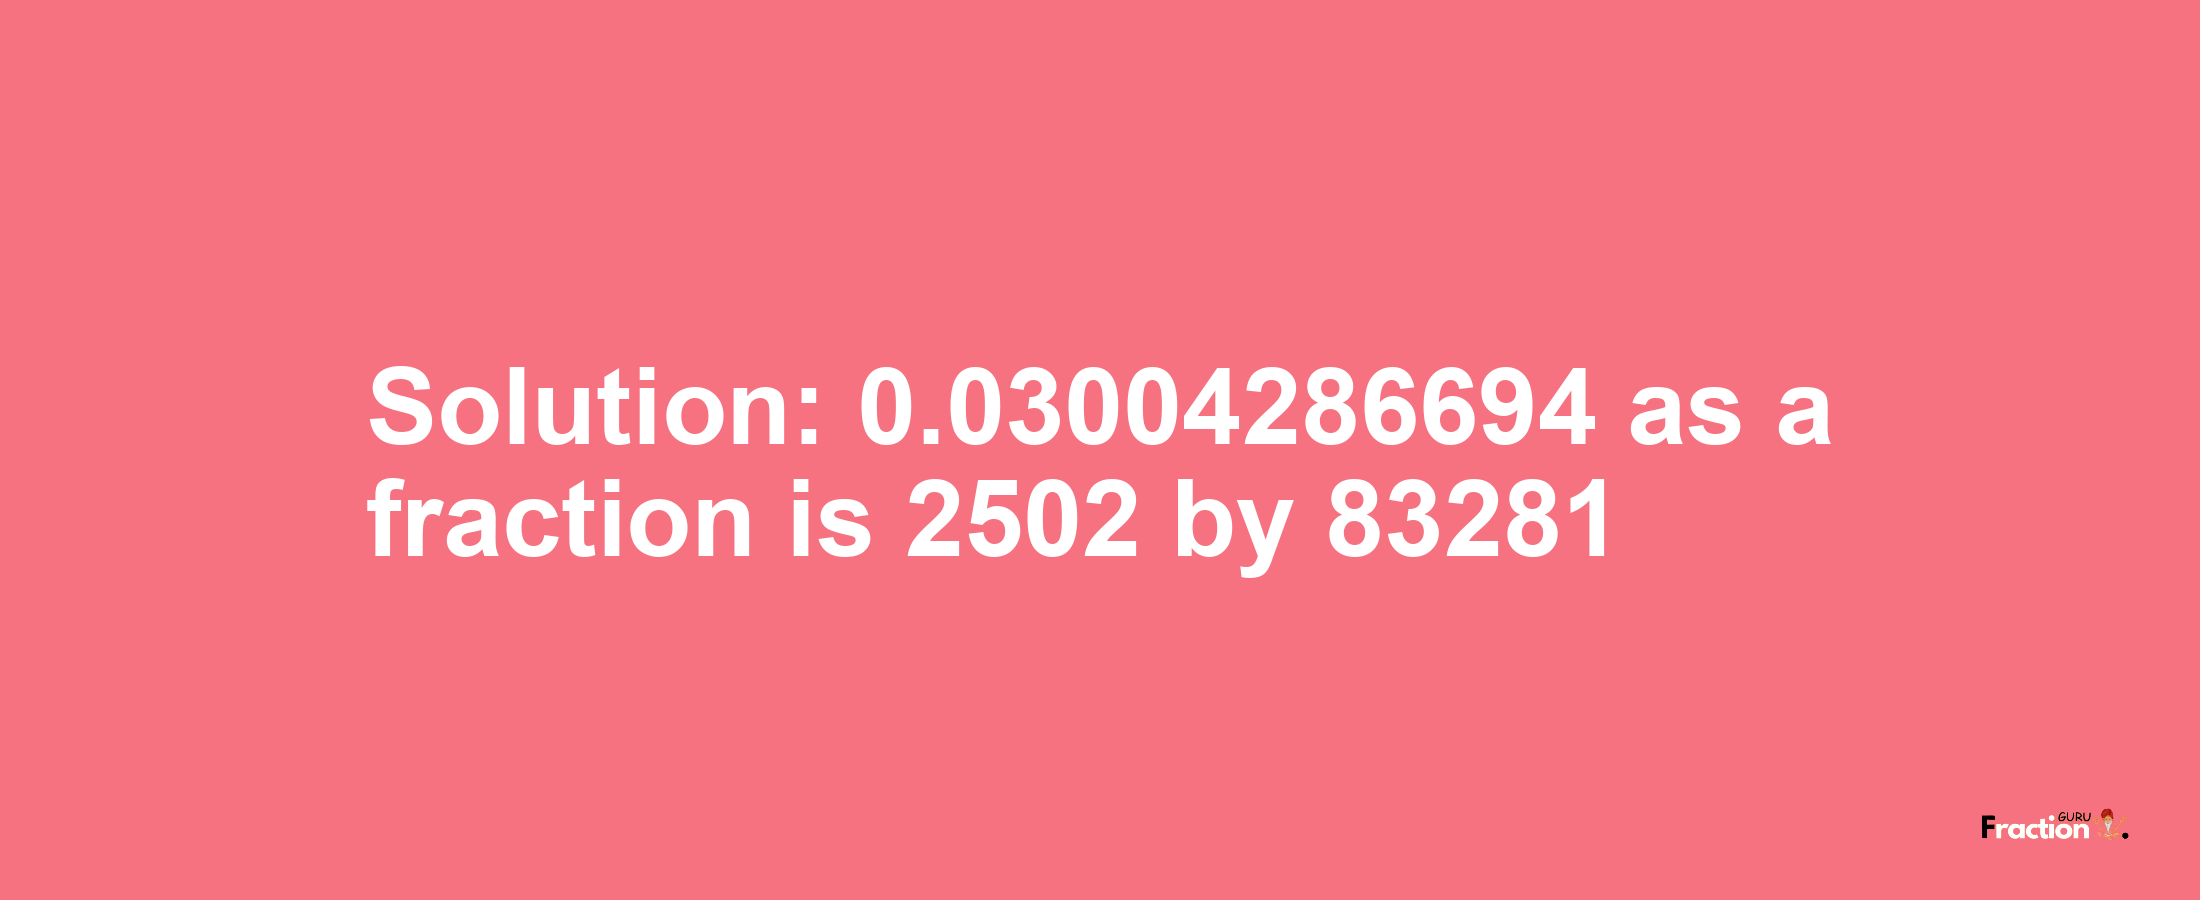 Solution:0.03004286694 as a fraction is 2502/83281